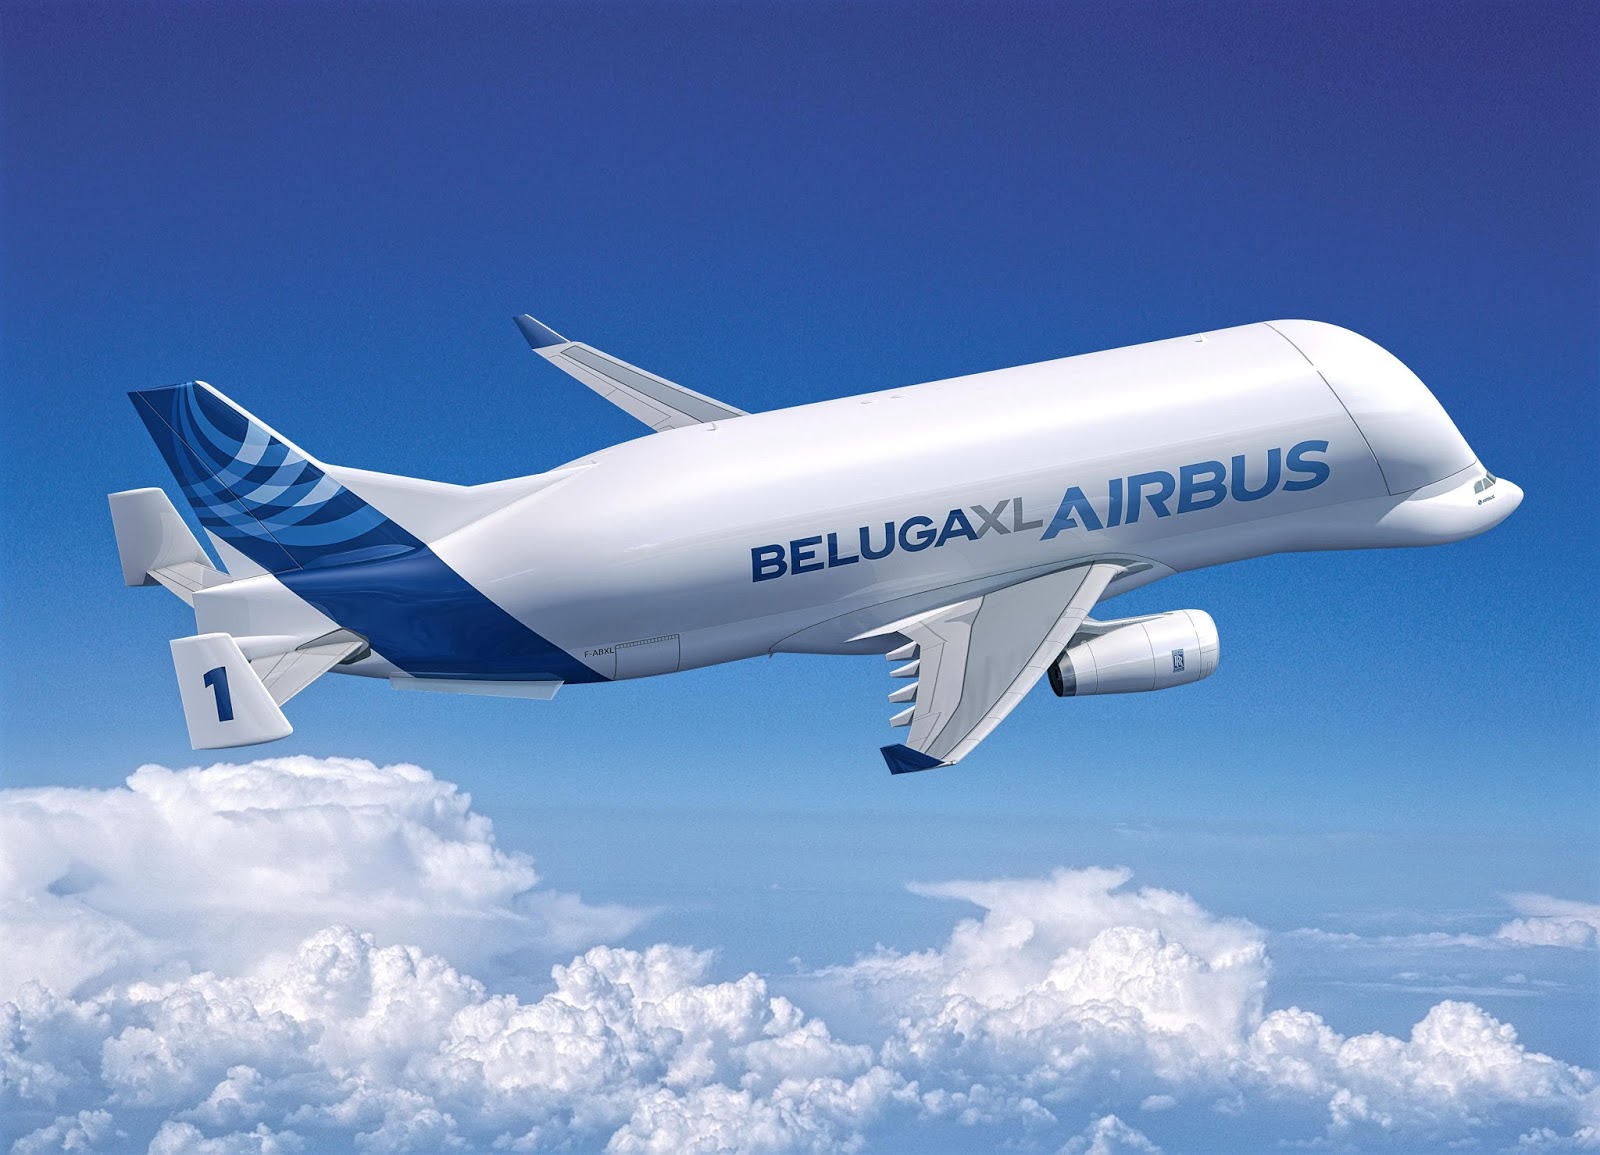 Airbus Assembly Line Receives Beluga XL Top Fuselage | Aircraft ...